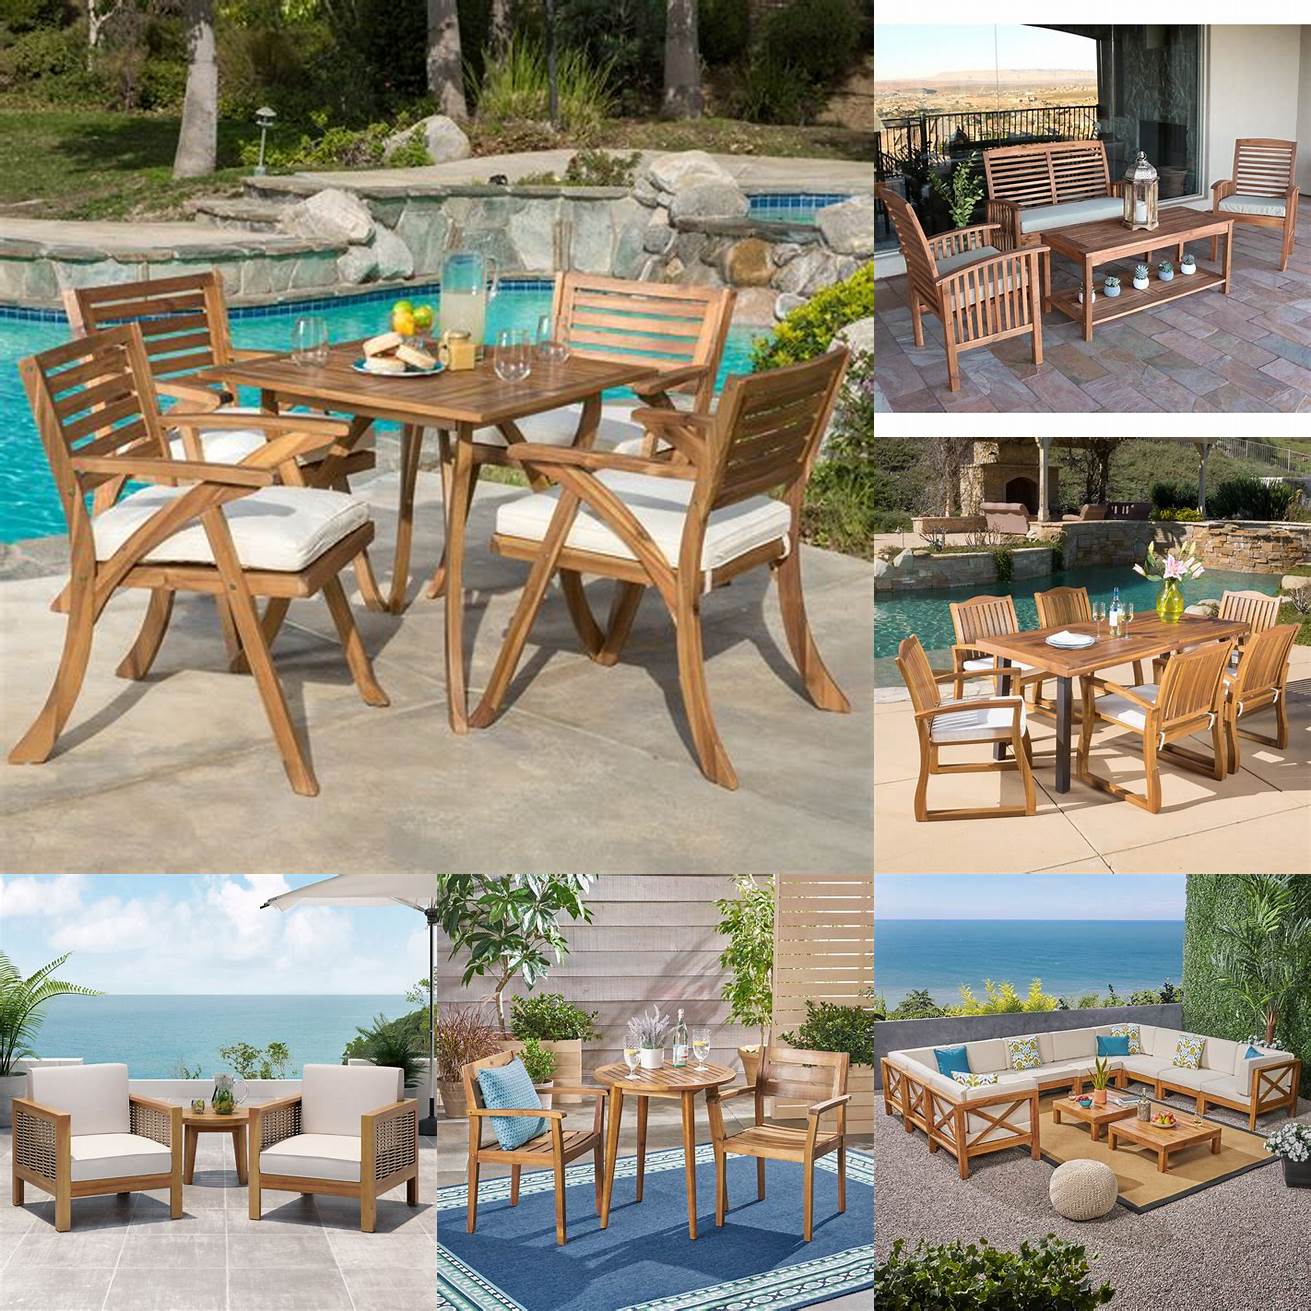 Comparison of Acacia and Teak furniture in different outdoor settings